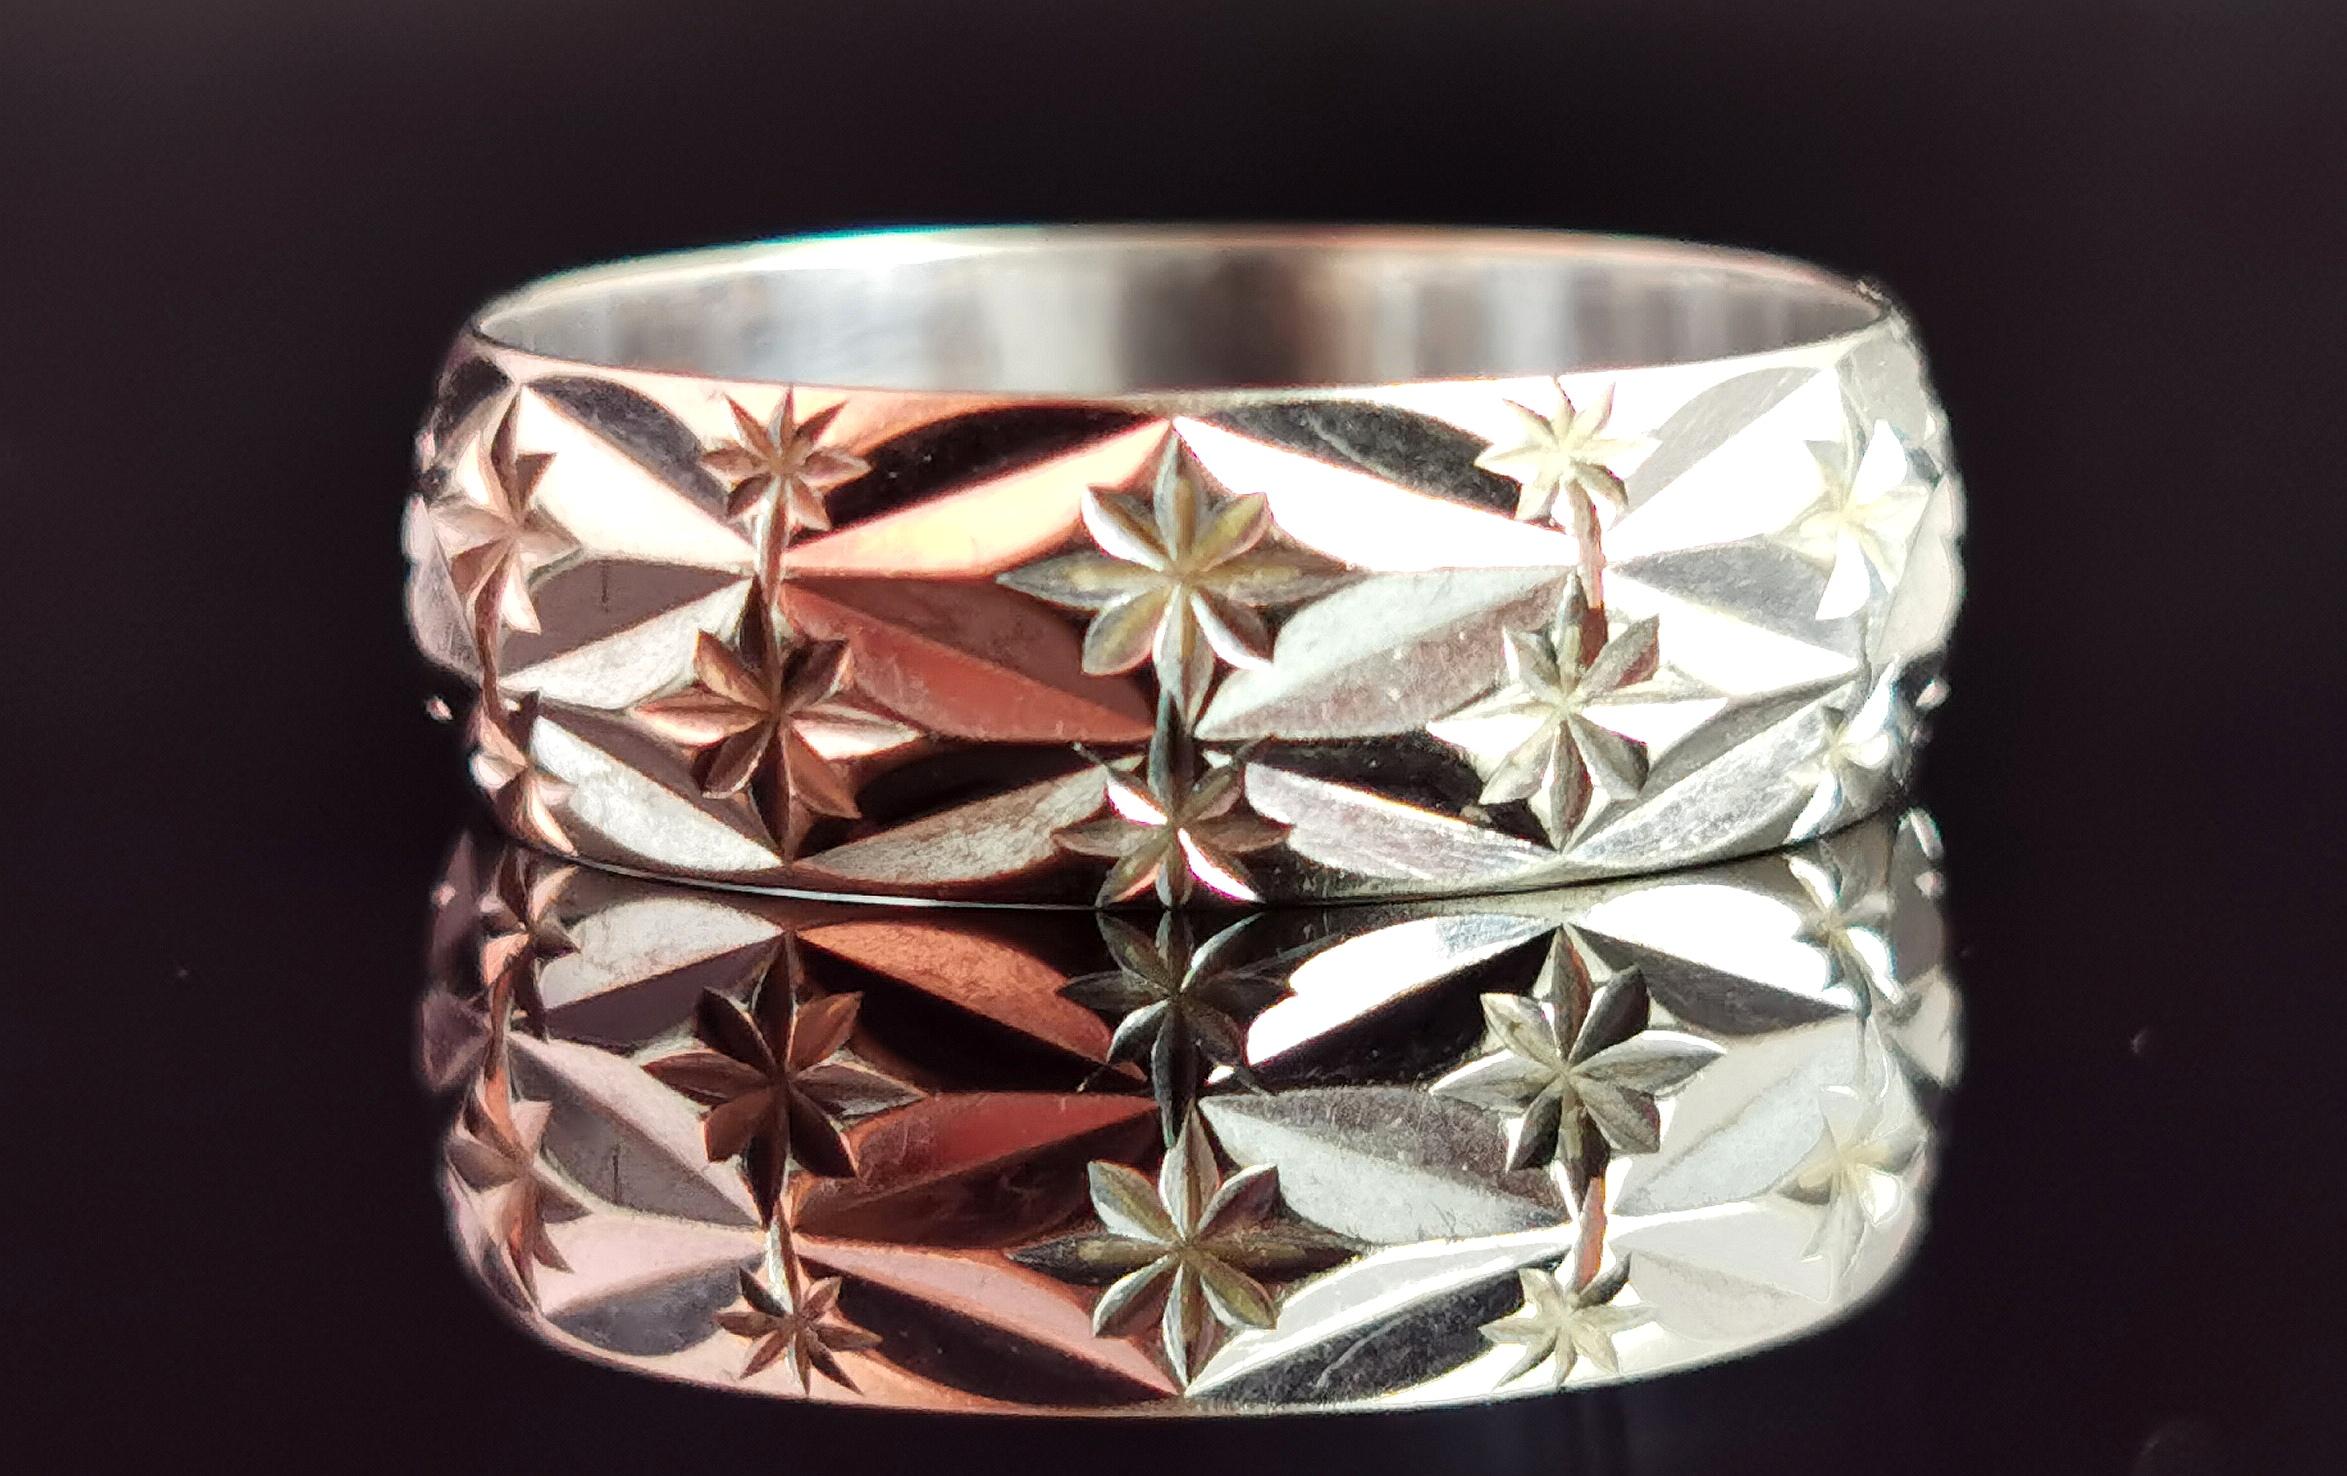 A gorgeous vintage 1970s 9kt white gold star motif band ring.

A lovely chunky white gold band with an all over geometric diamond pattern engraved with stars.

The interesting pattern and shape along with the stars really transform this ring from